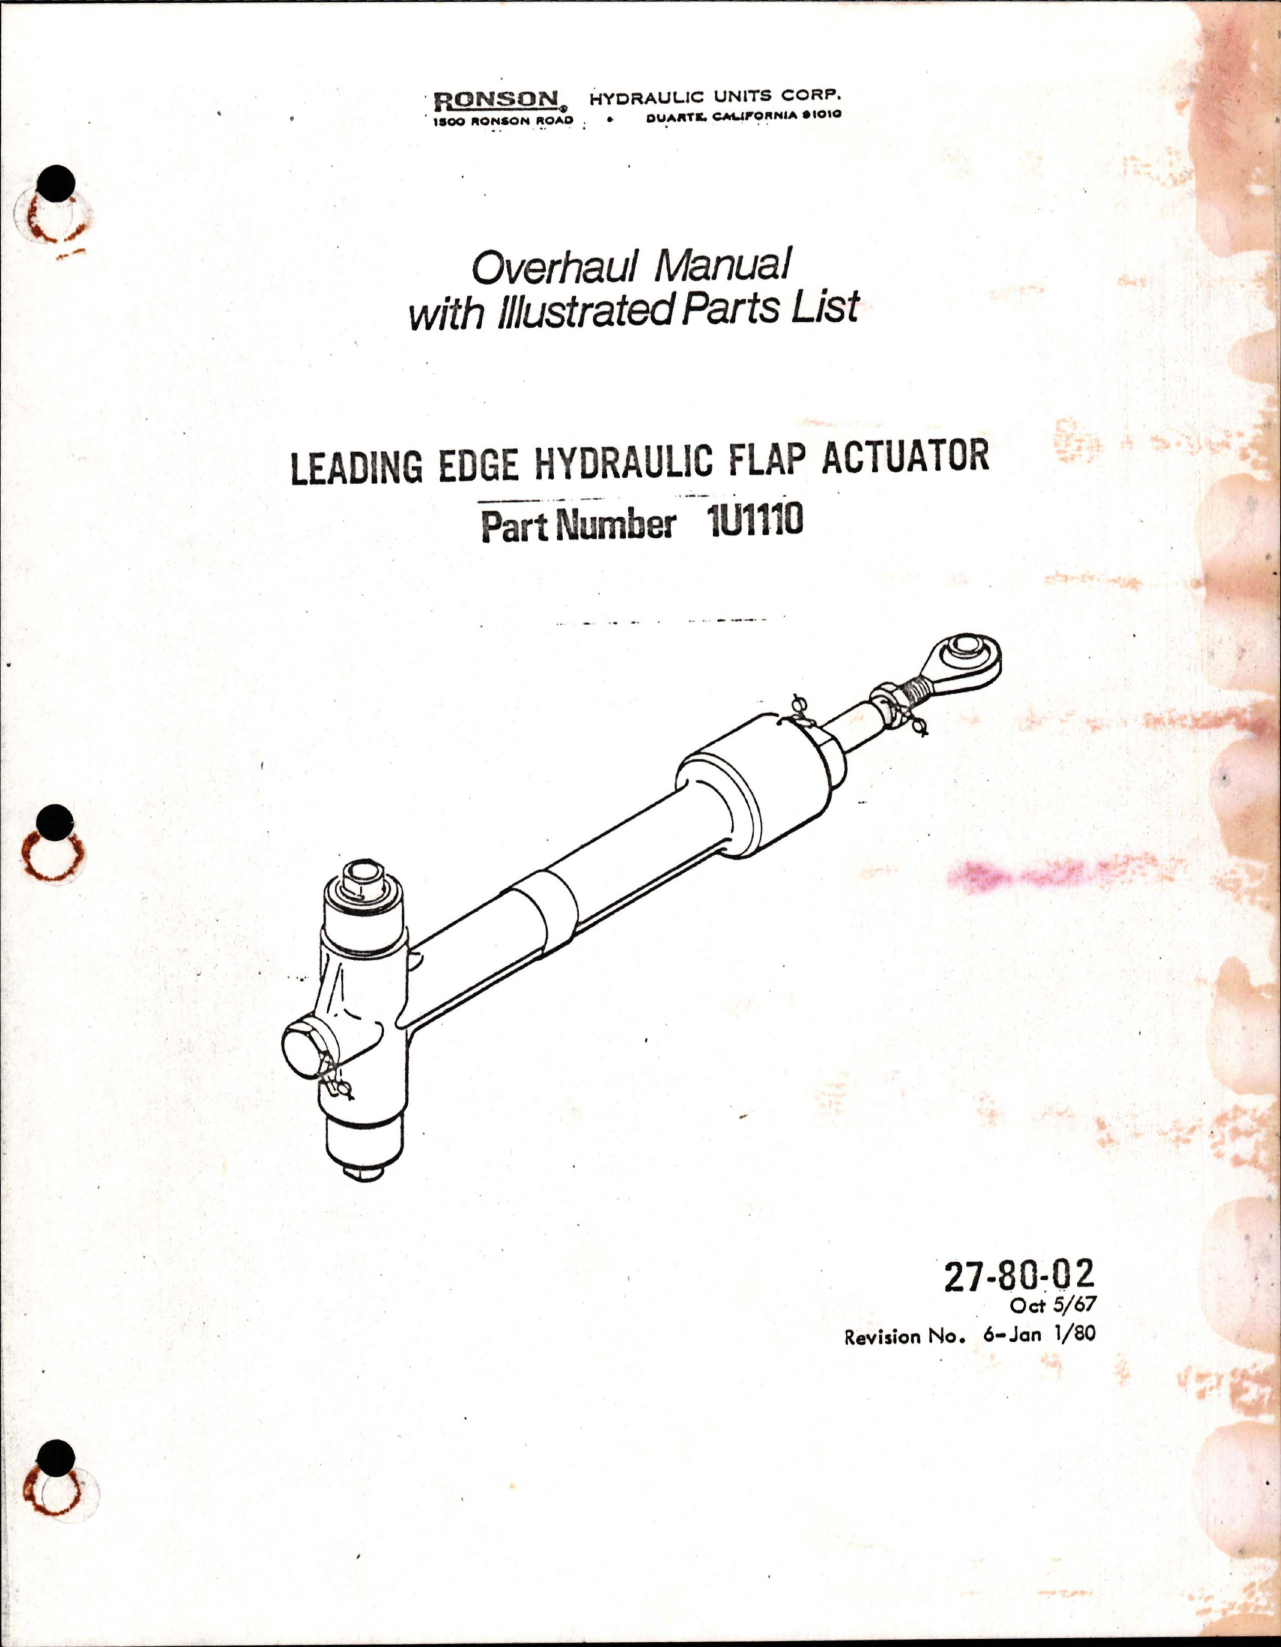 Sample page 1 from AirCorps Library document: Overhaul with Illustrated Parts List for Leading Edge Hydraulic Flap Actuator - Part 101110